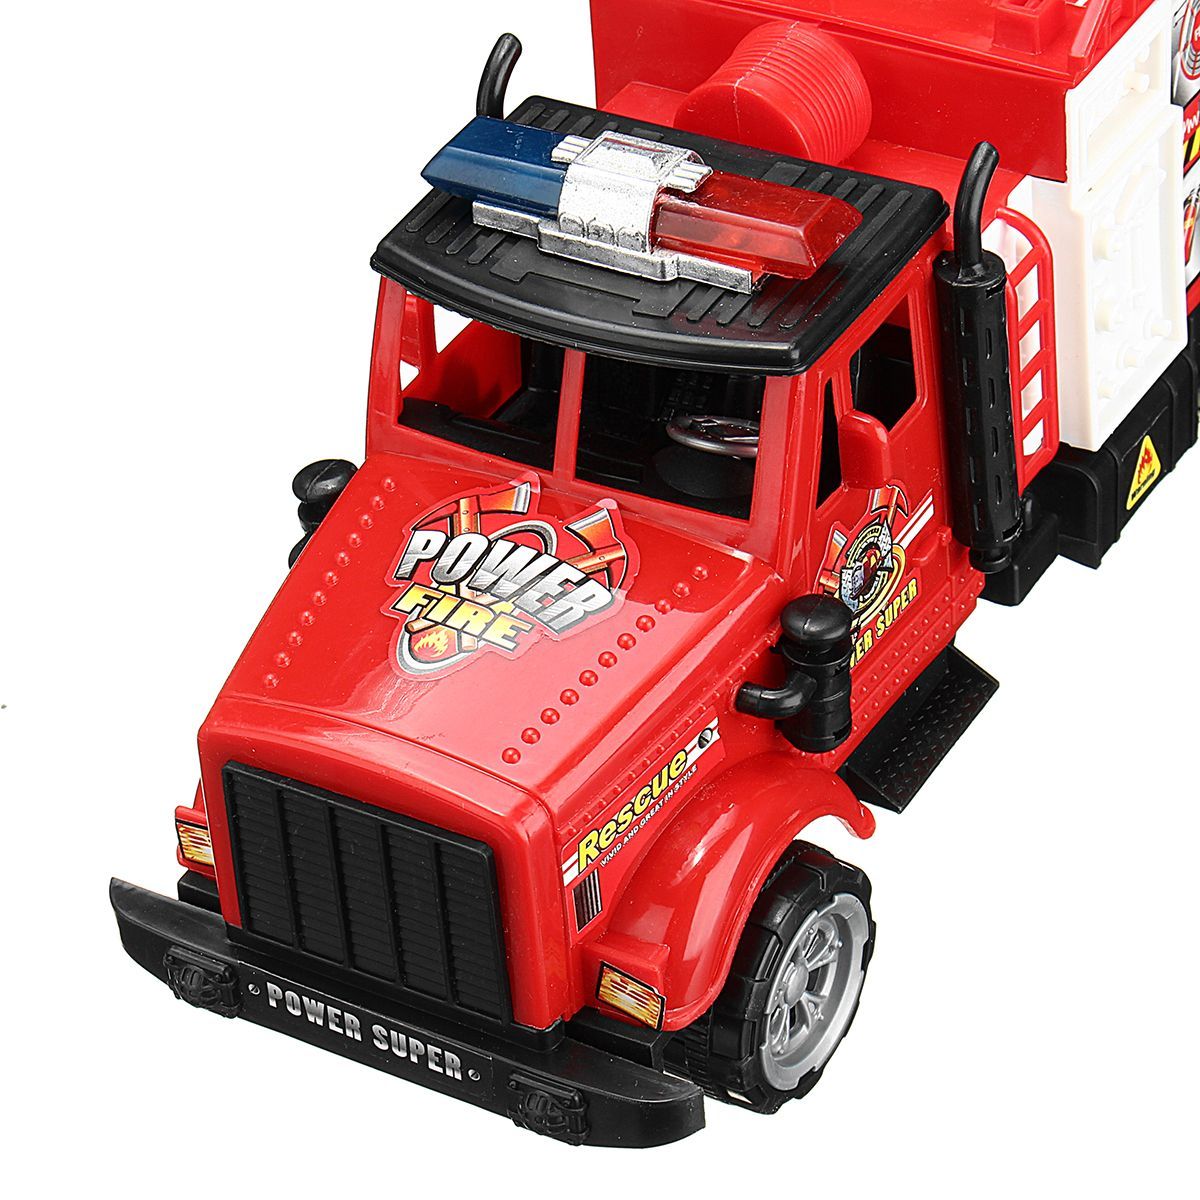 Baby-Kids-Fire-Tanker-Truck-Construction-Agitating-Lorry-Vehicle-Cars-Model-Toys-for-Kids-Children-T-1545745